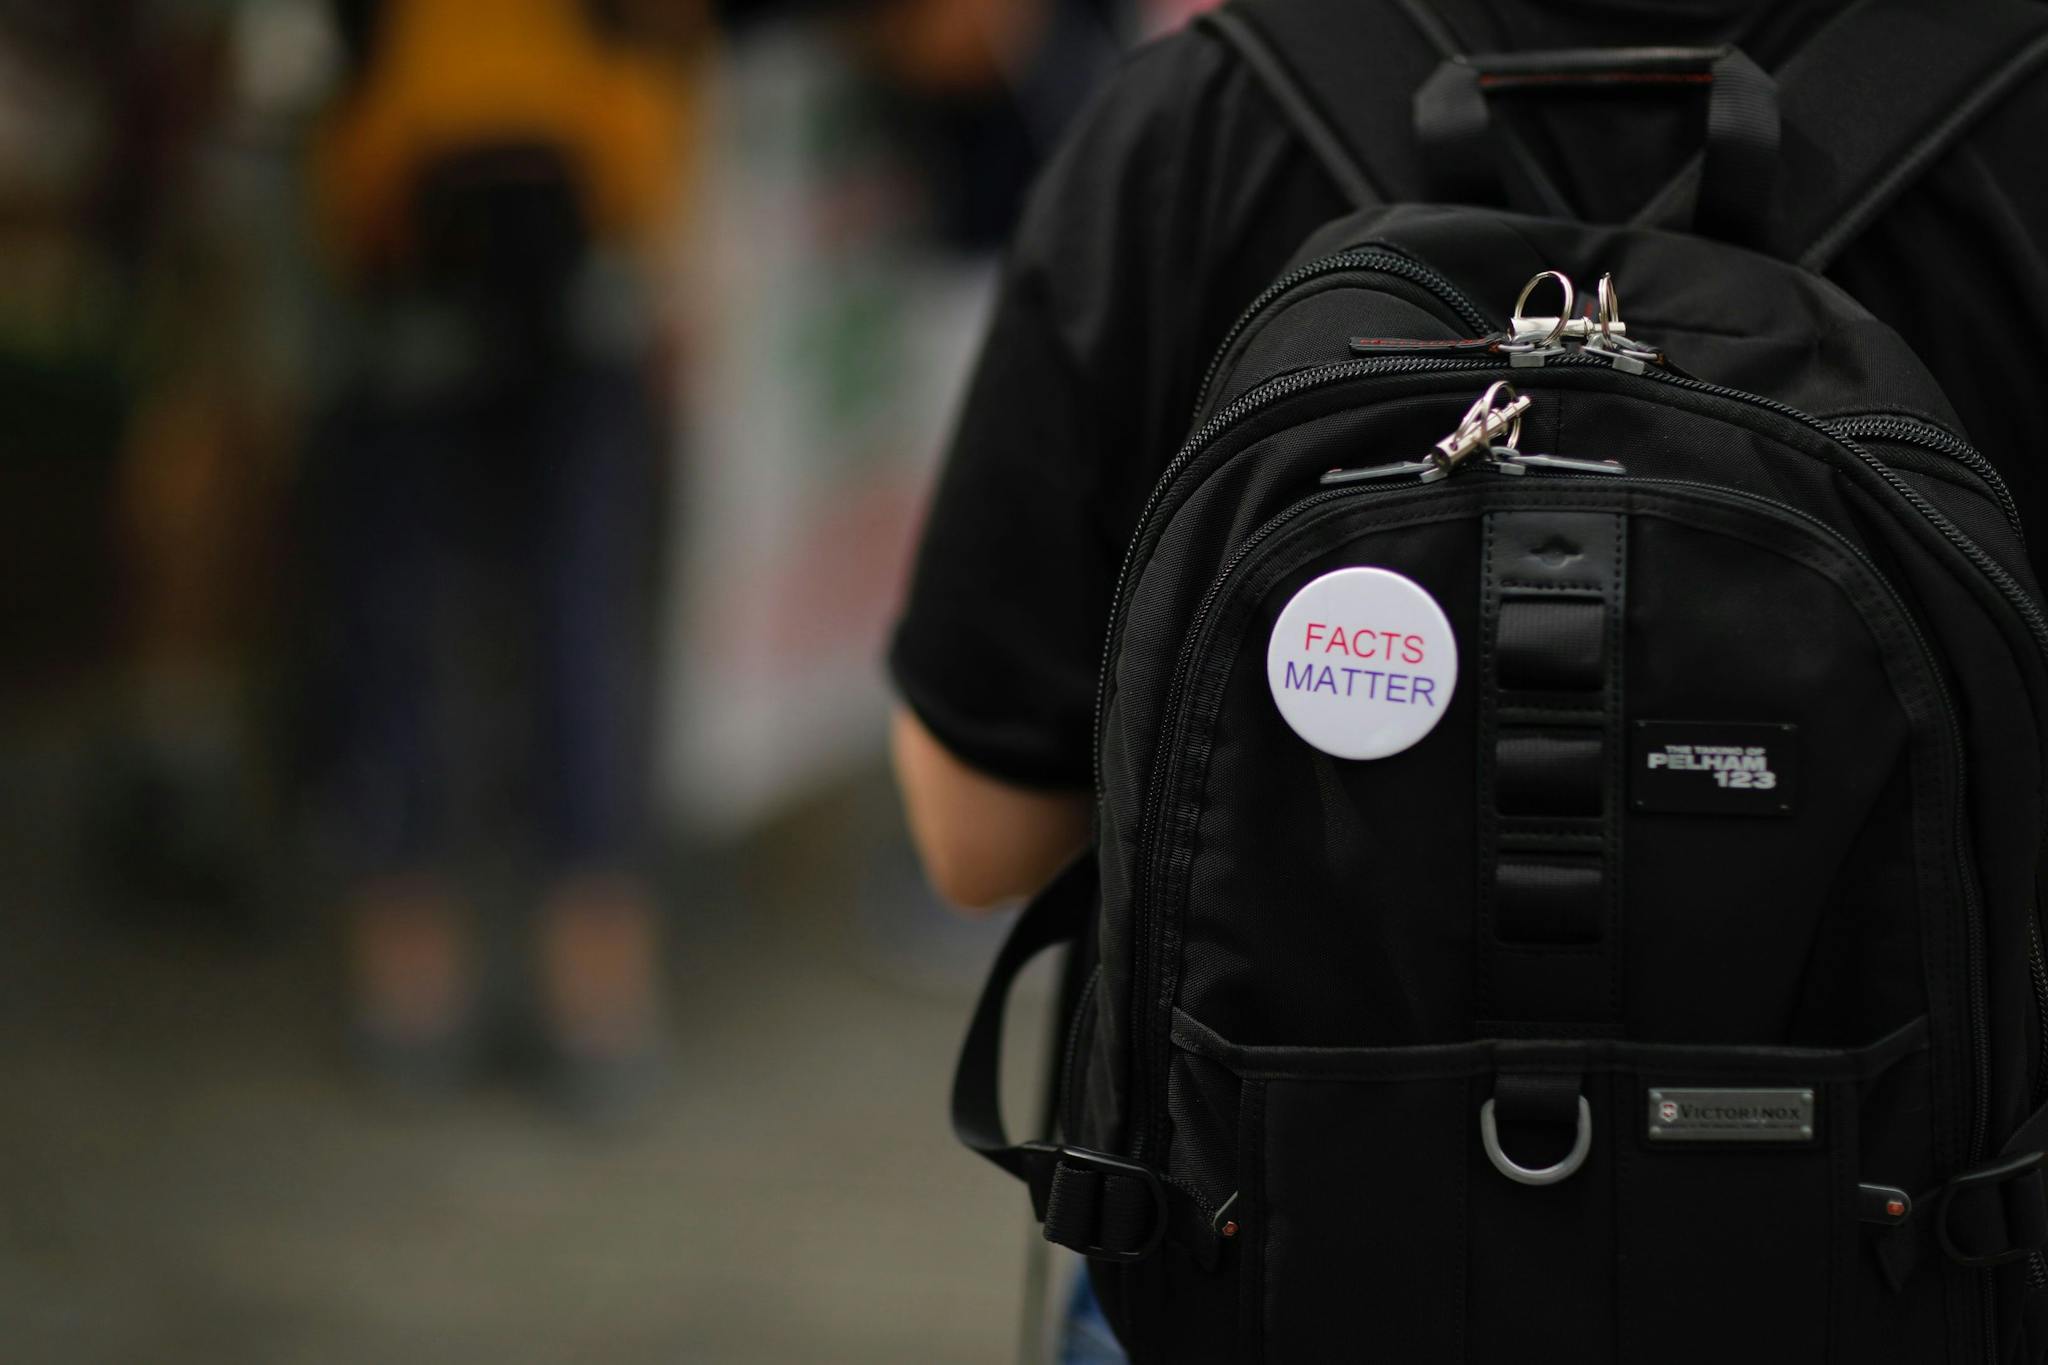 A rucksack with a 'facts matter' badge on it.